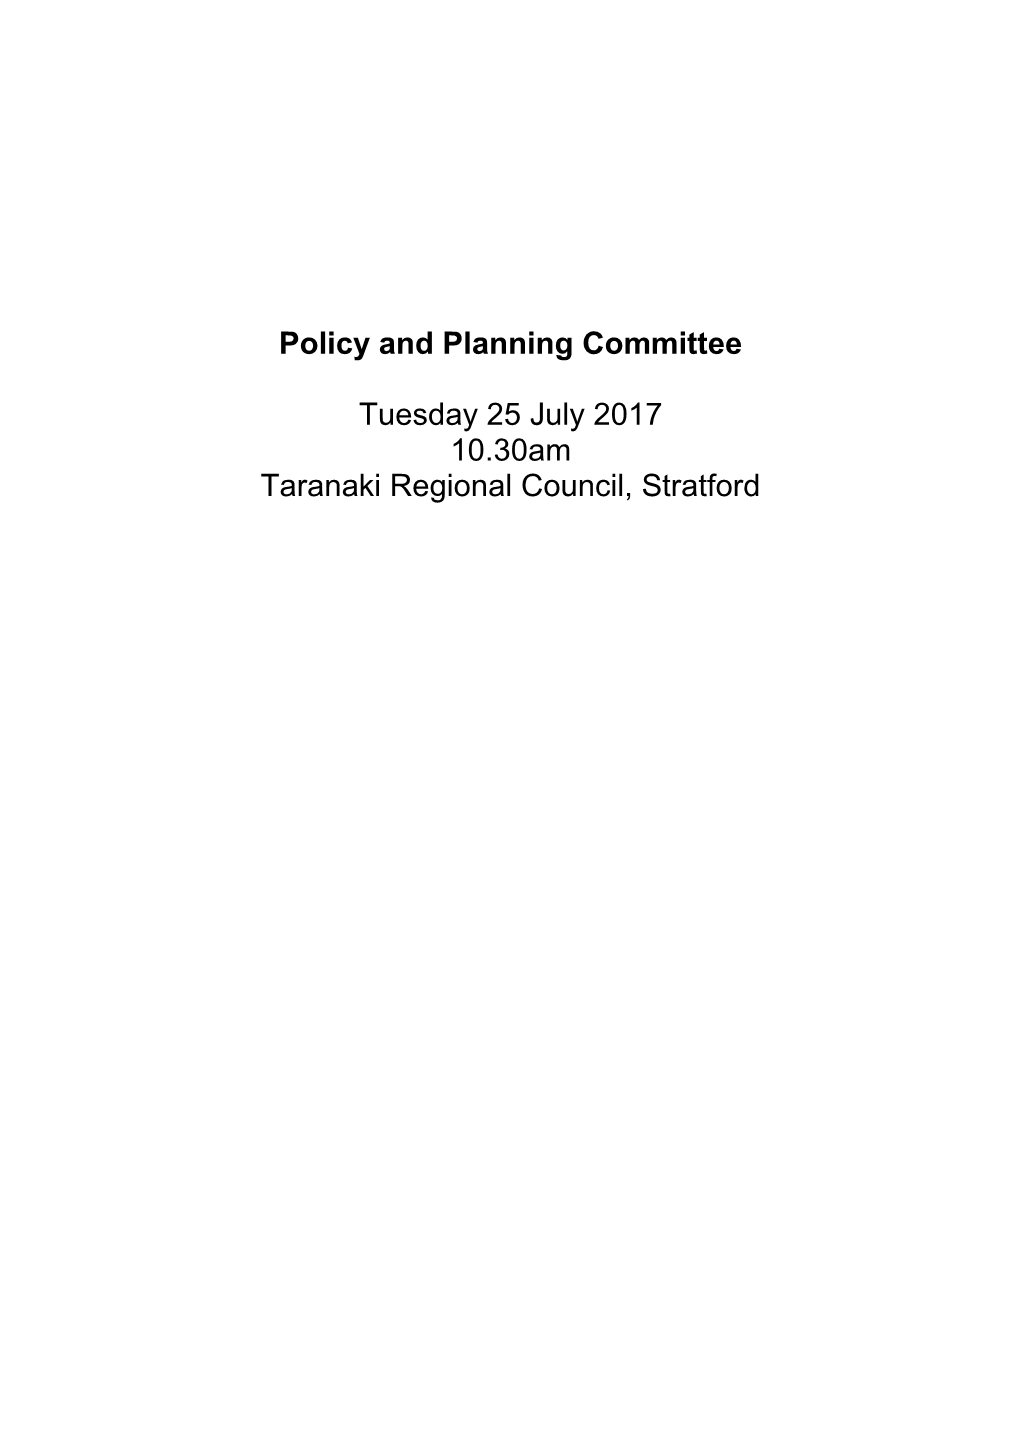 Policy and Planning Committee Tuesday 25 July 2017 10.30Am